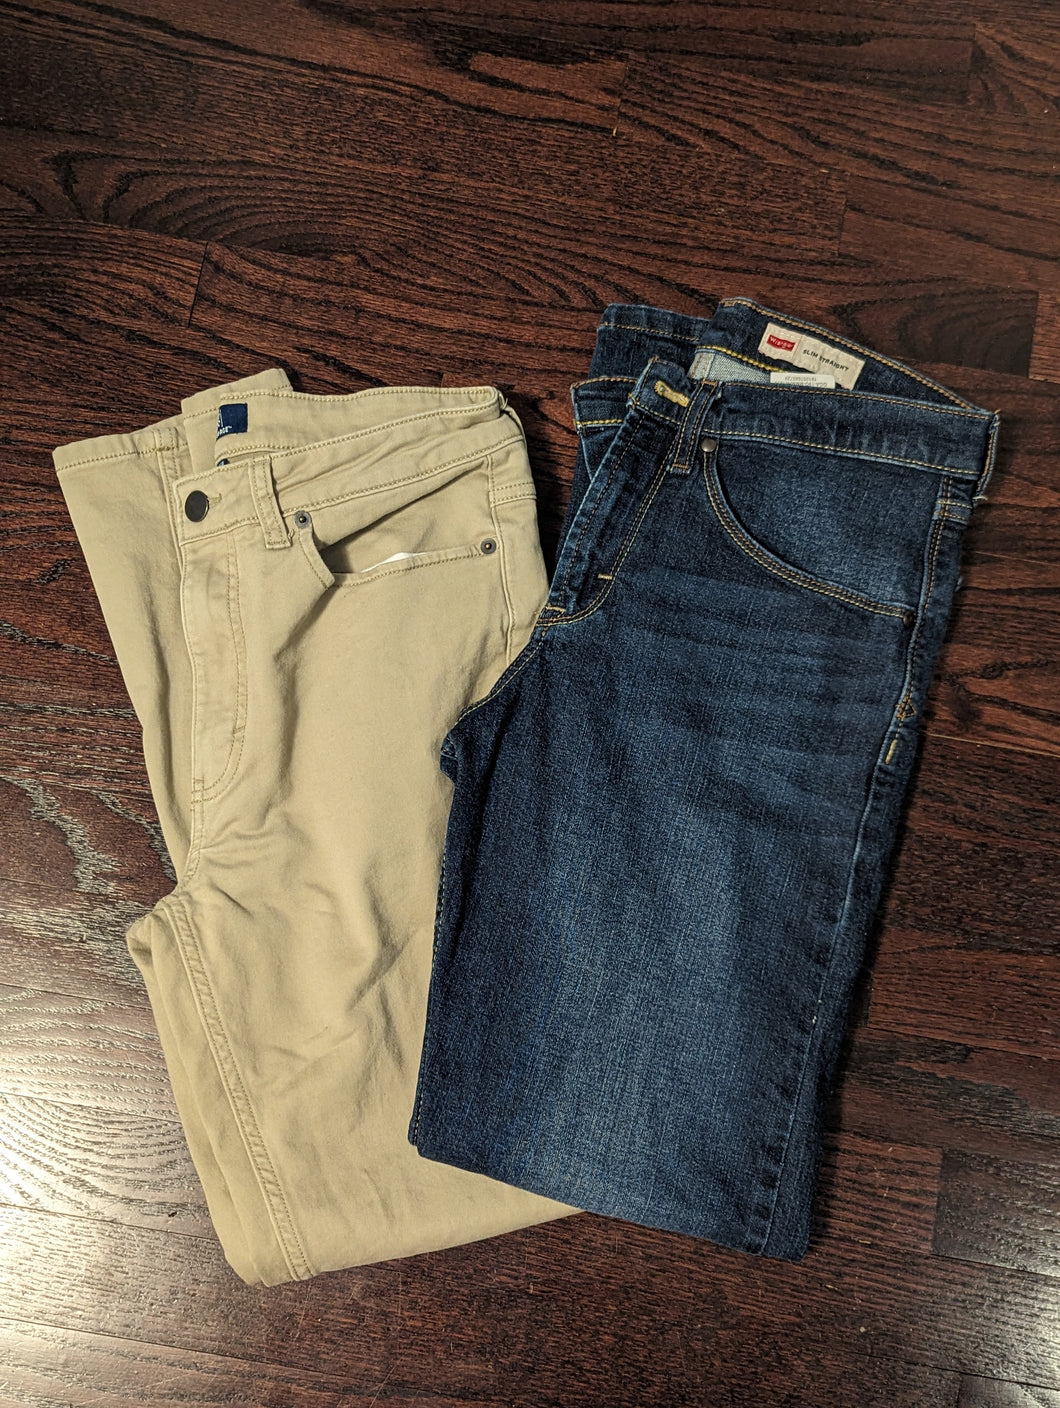 George and Wrangler pants size 28/30 28